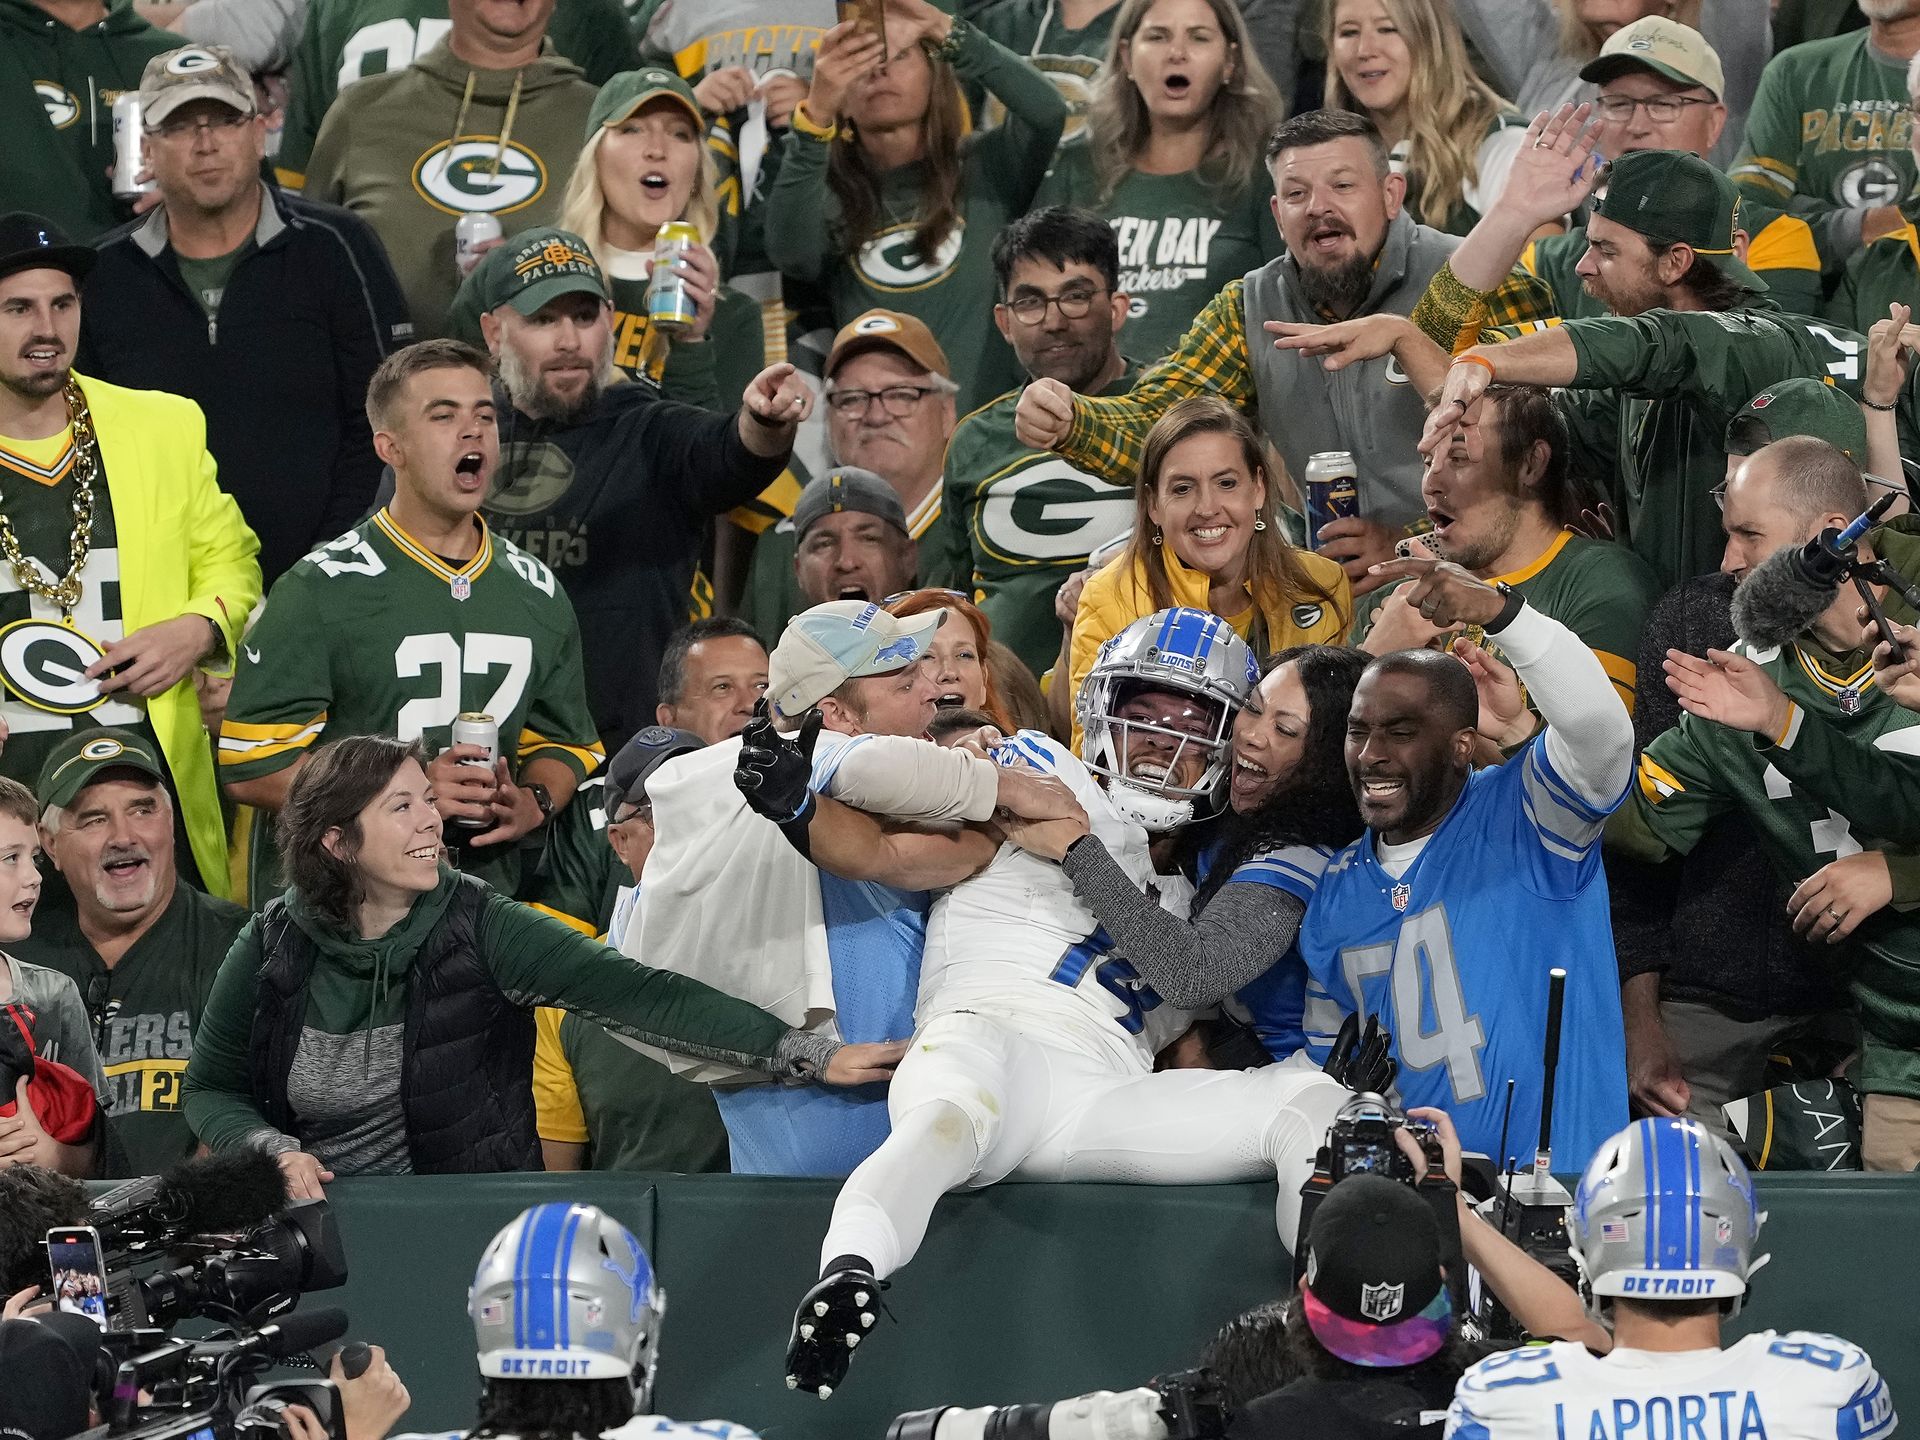 Detroit Lions 34-20 Green Bay Packers: David Montgomery scores